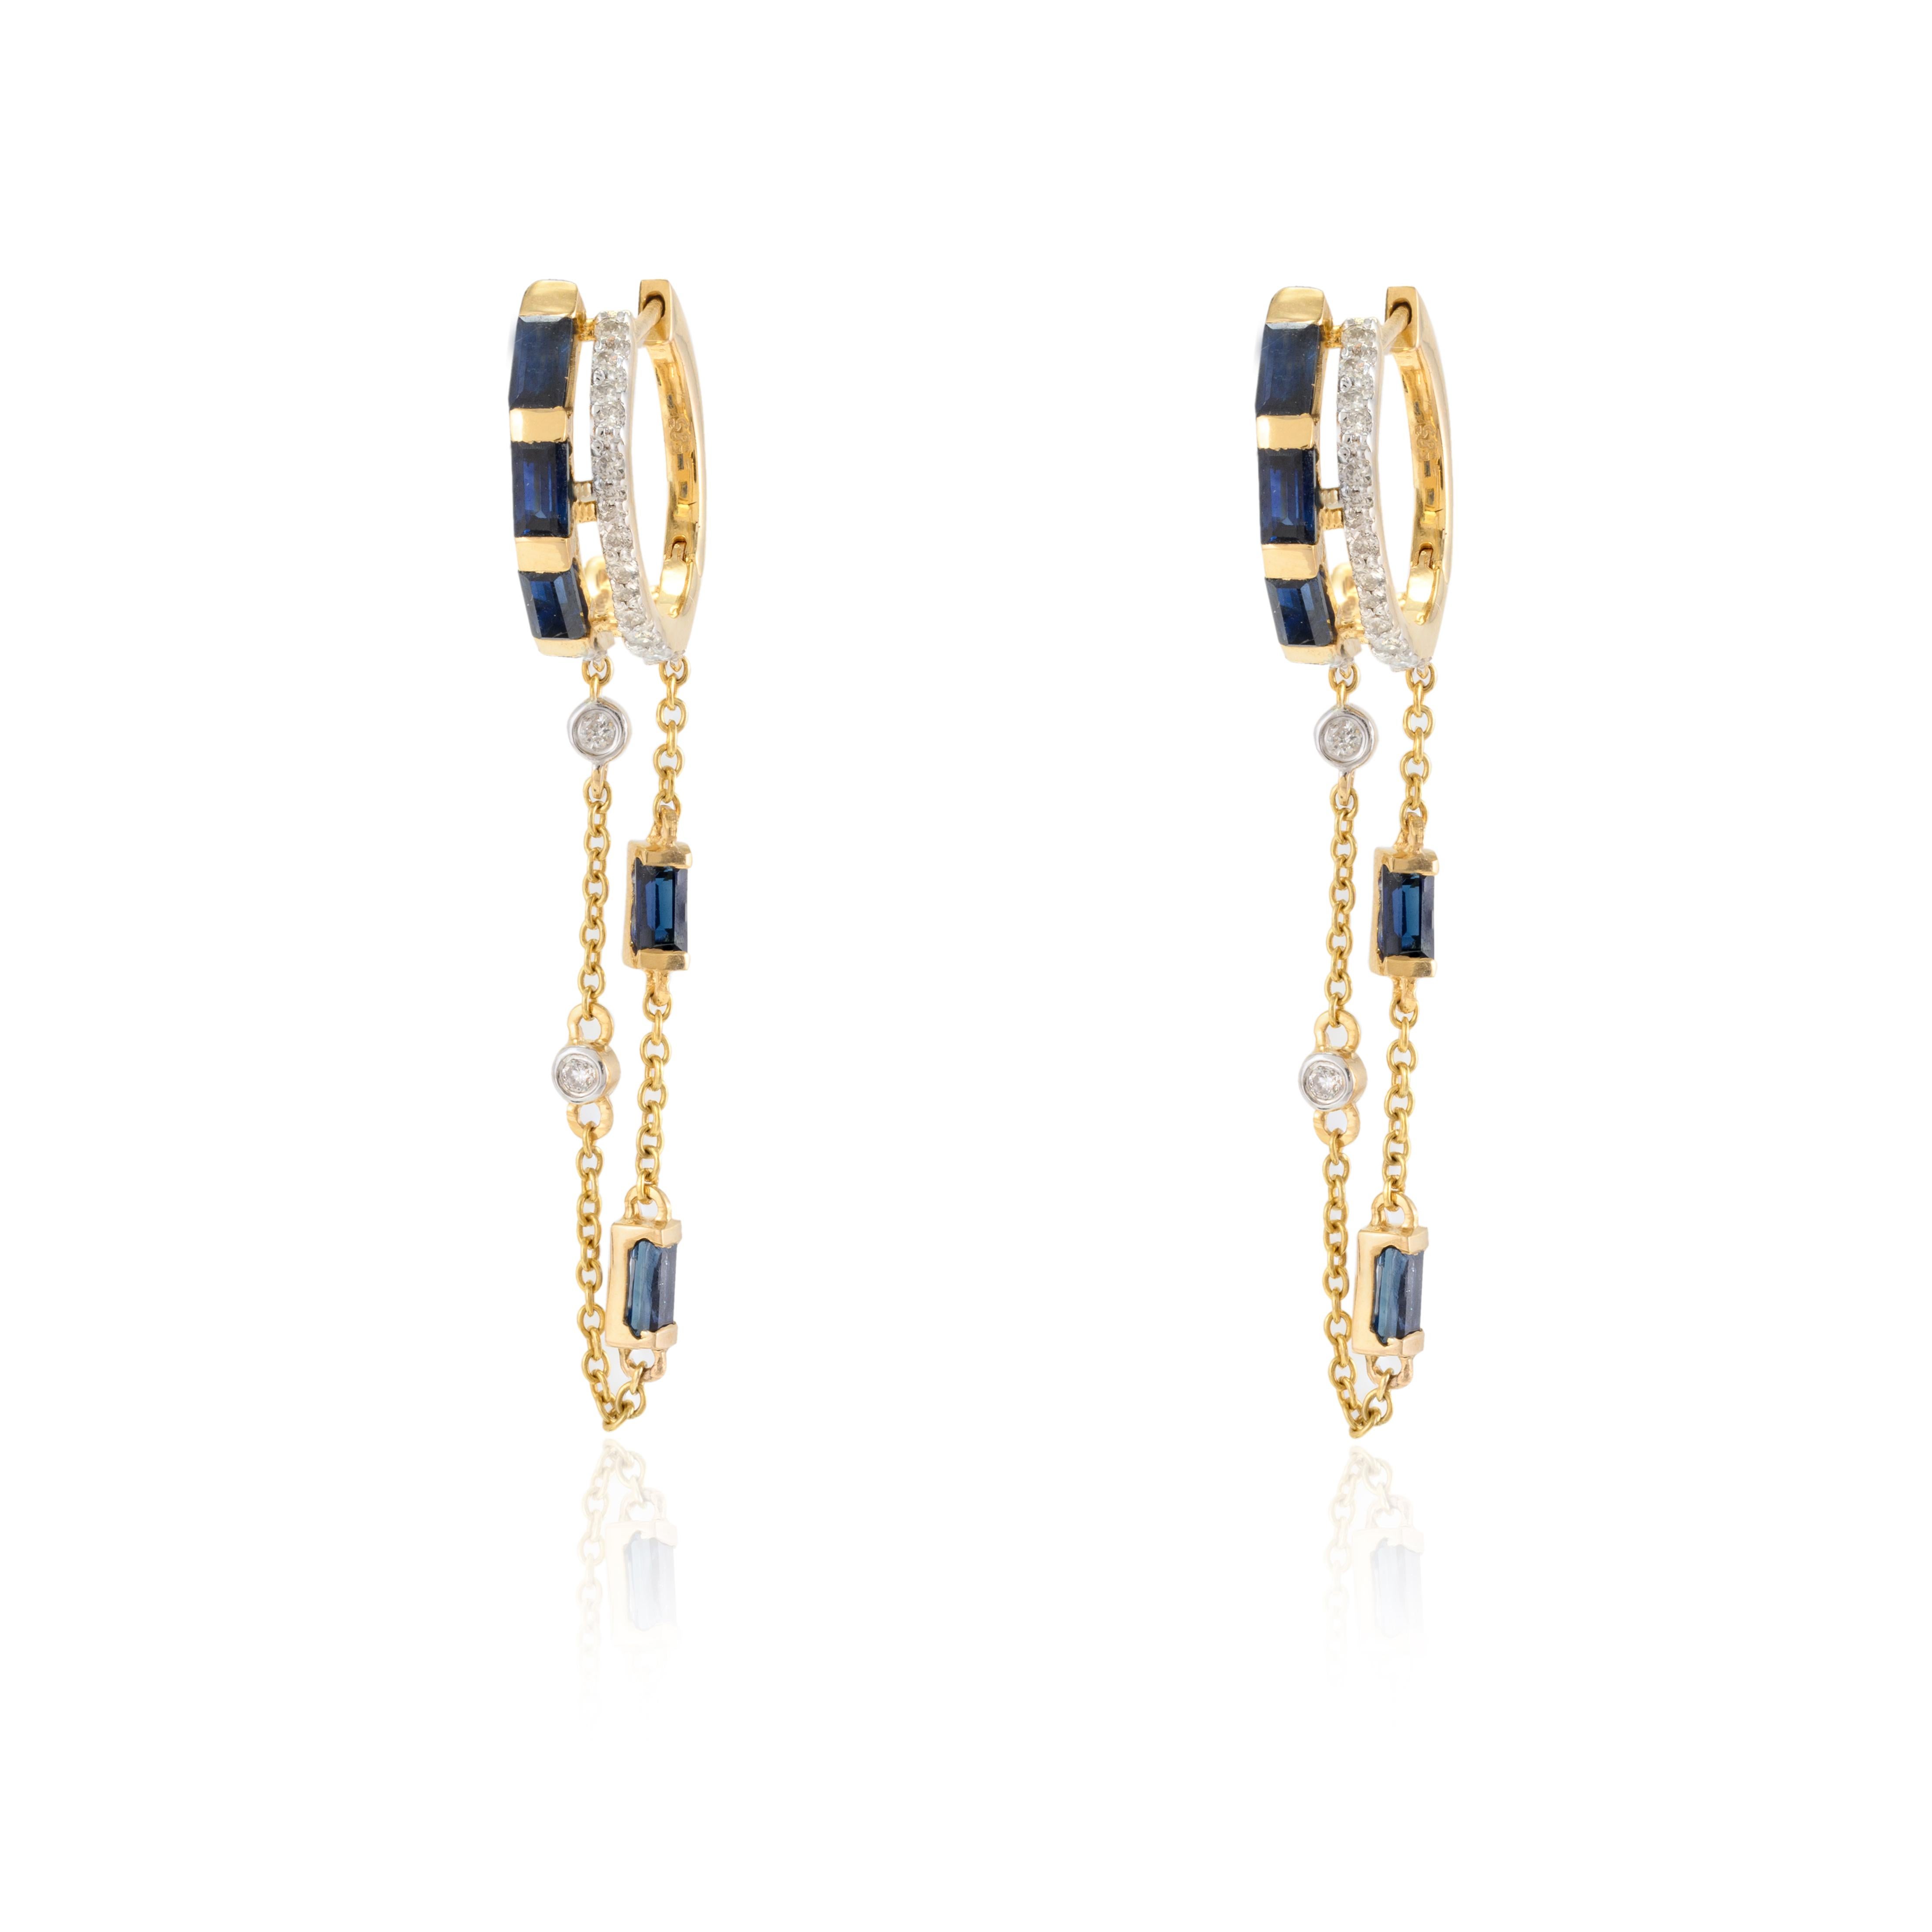 Unique Blue Sapphire and Diamond Dangling Earrings in 14K Gold to make a statement with your look. You shall need stud earrings to make a statement with your look. These earrings create a sparkling, luxurious look featuring baguette cut